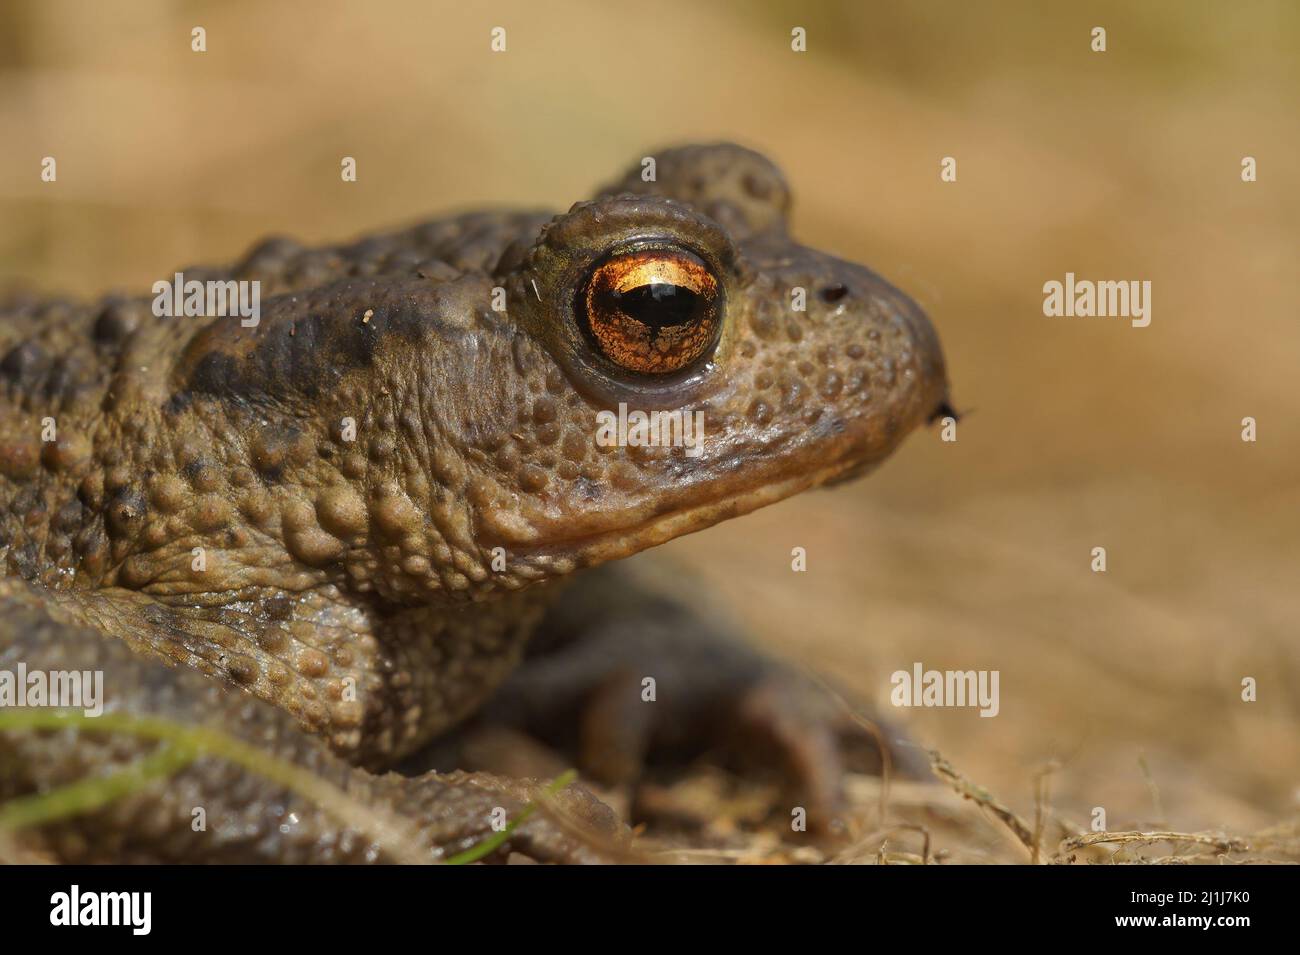 Closeup on a female European common toad , Bufo bufo, sitting on the ground in the garden Stock Photo